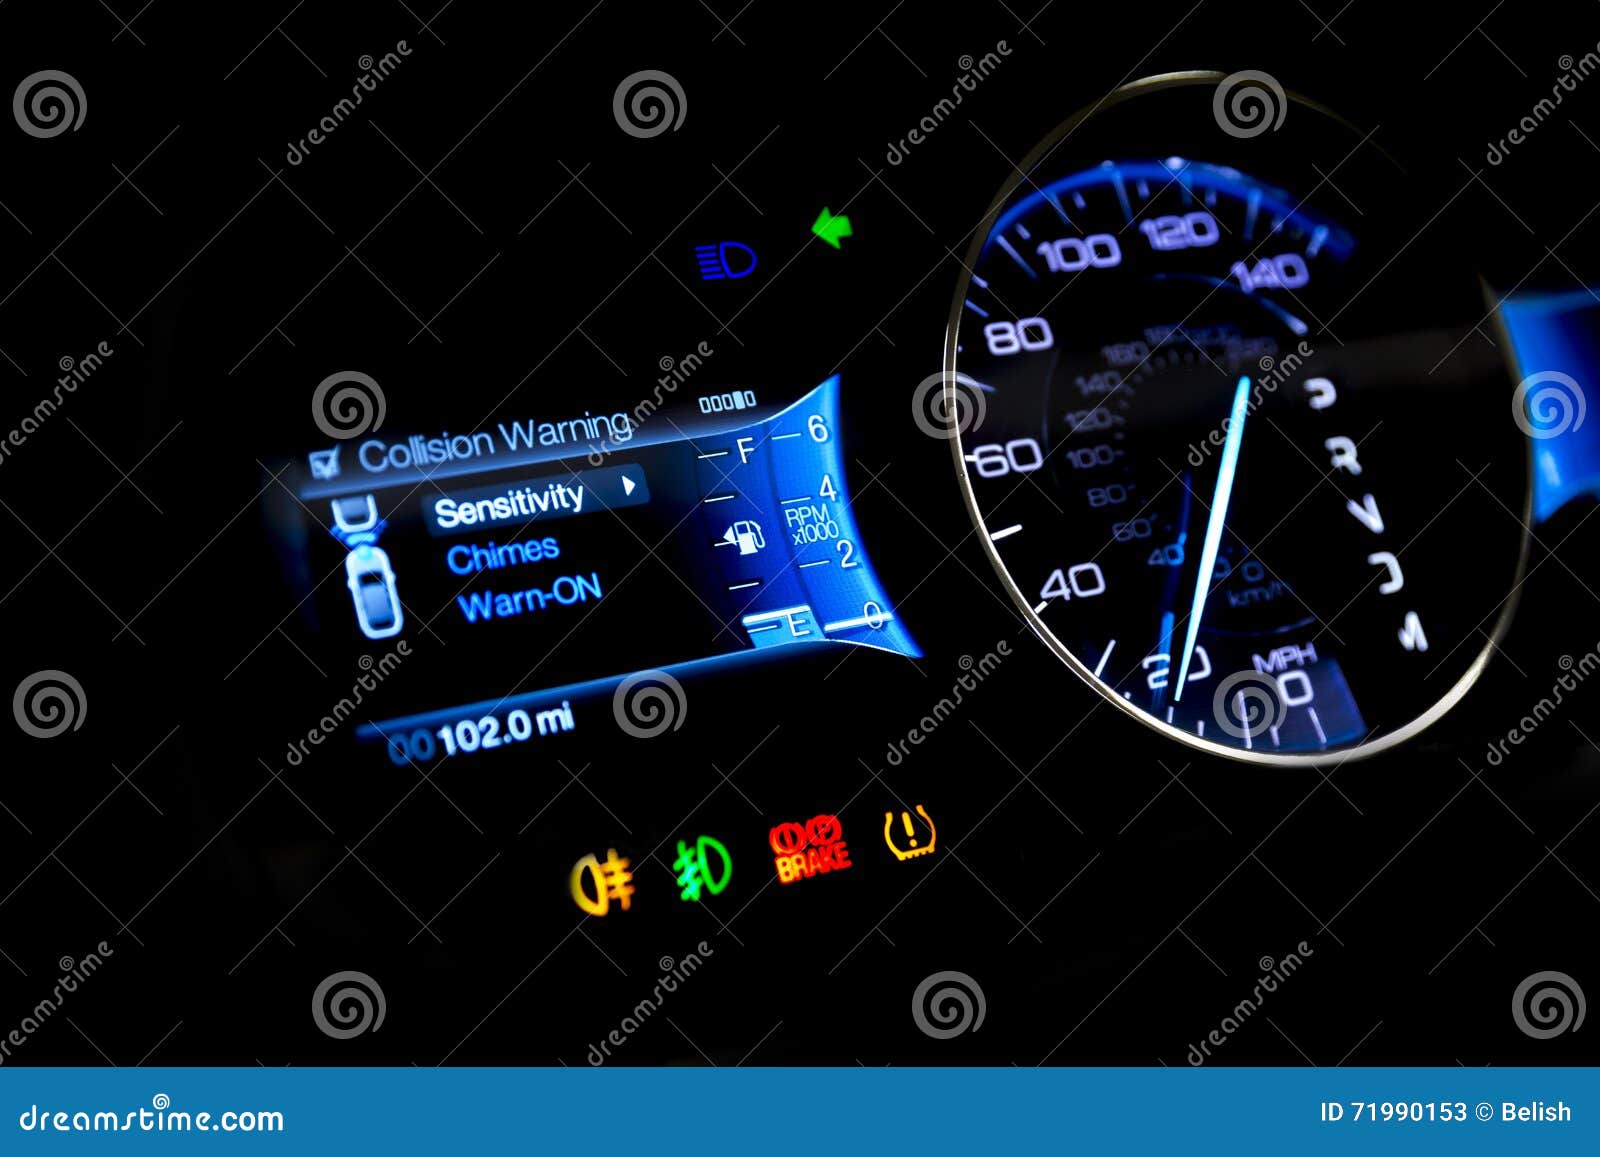 dashboard and digital display - mileage, fuel consumption, speed